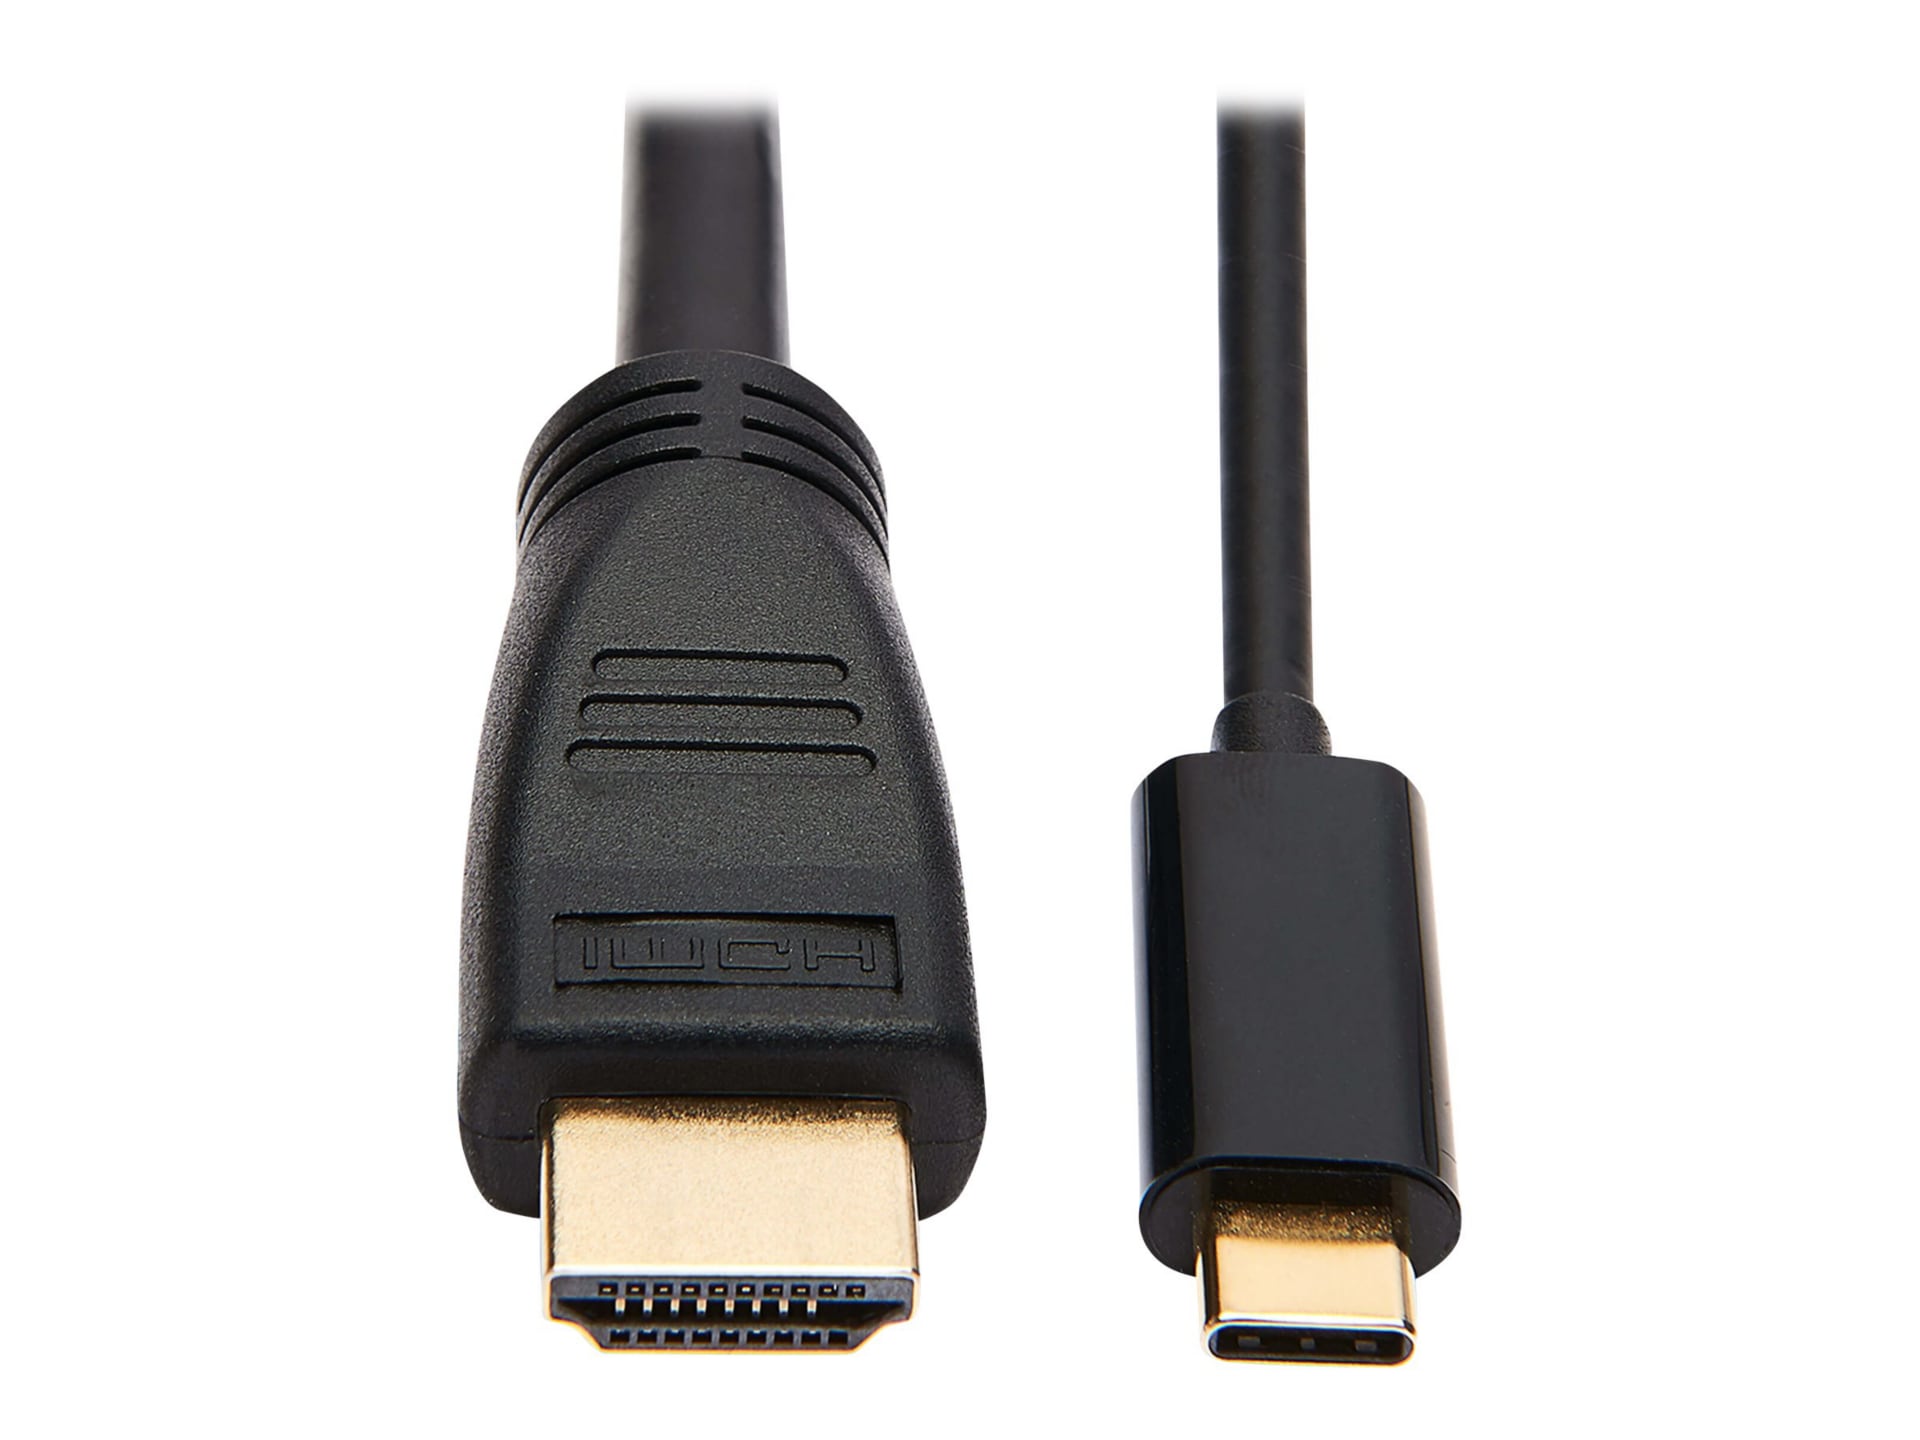 Tripp Lite USB C to HDMI Adapter Cable USB 3.1 4K@60Hz M/M USB-C Black 15ft - video cable - HDMI / USB - 15 ft